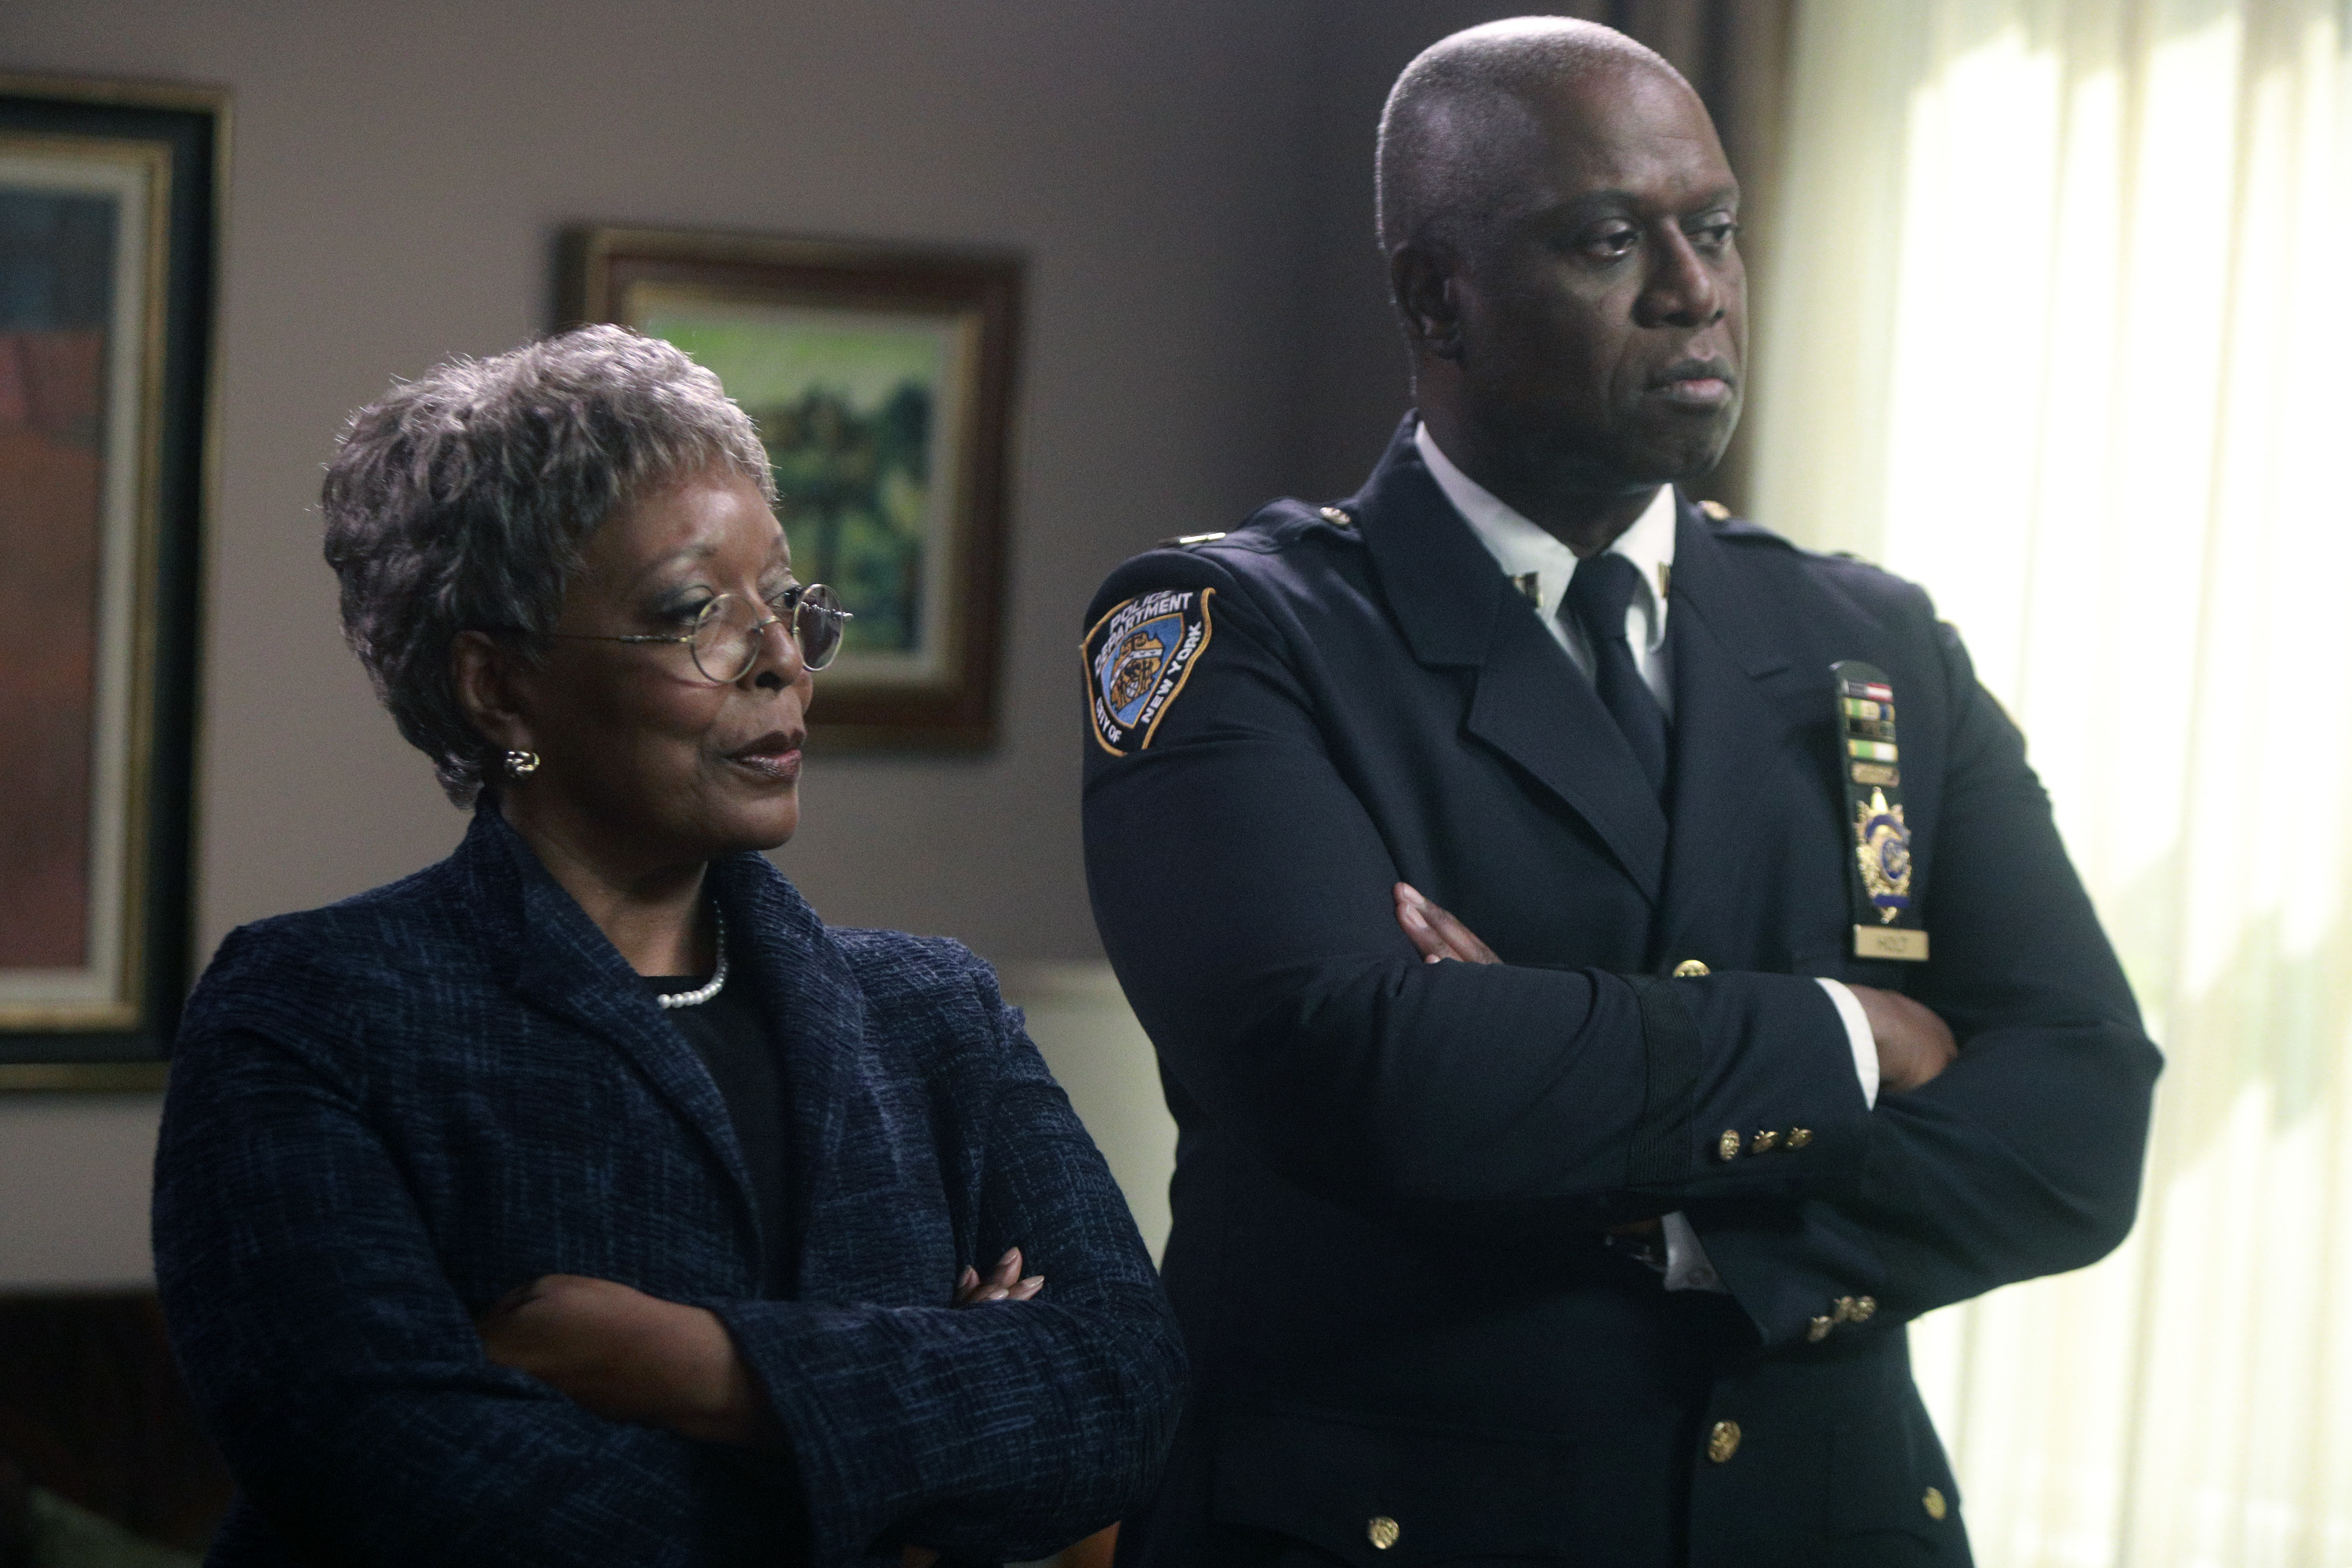 L. Scott Caldwell and Andre Braugher cross their arms in disapproval